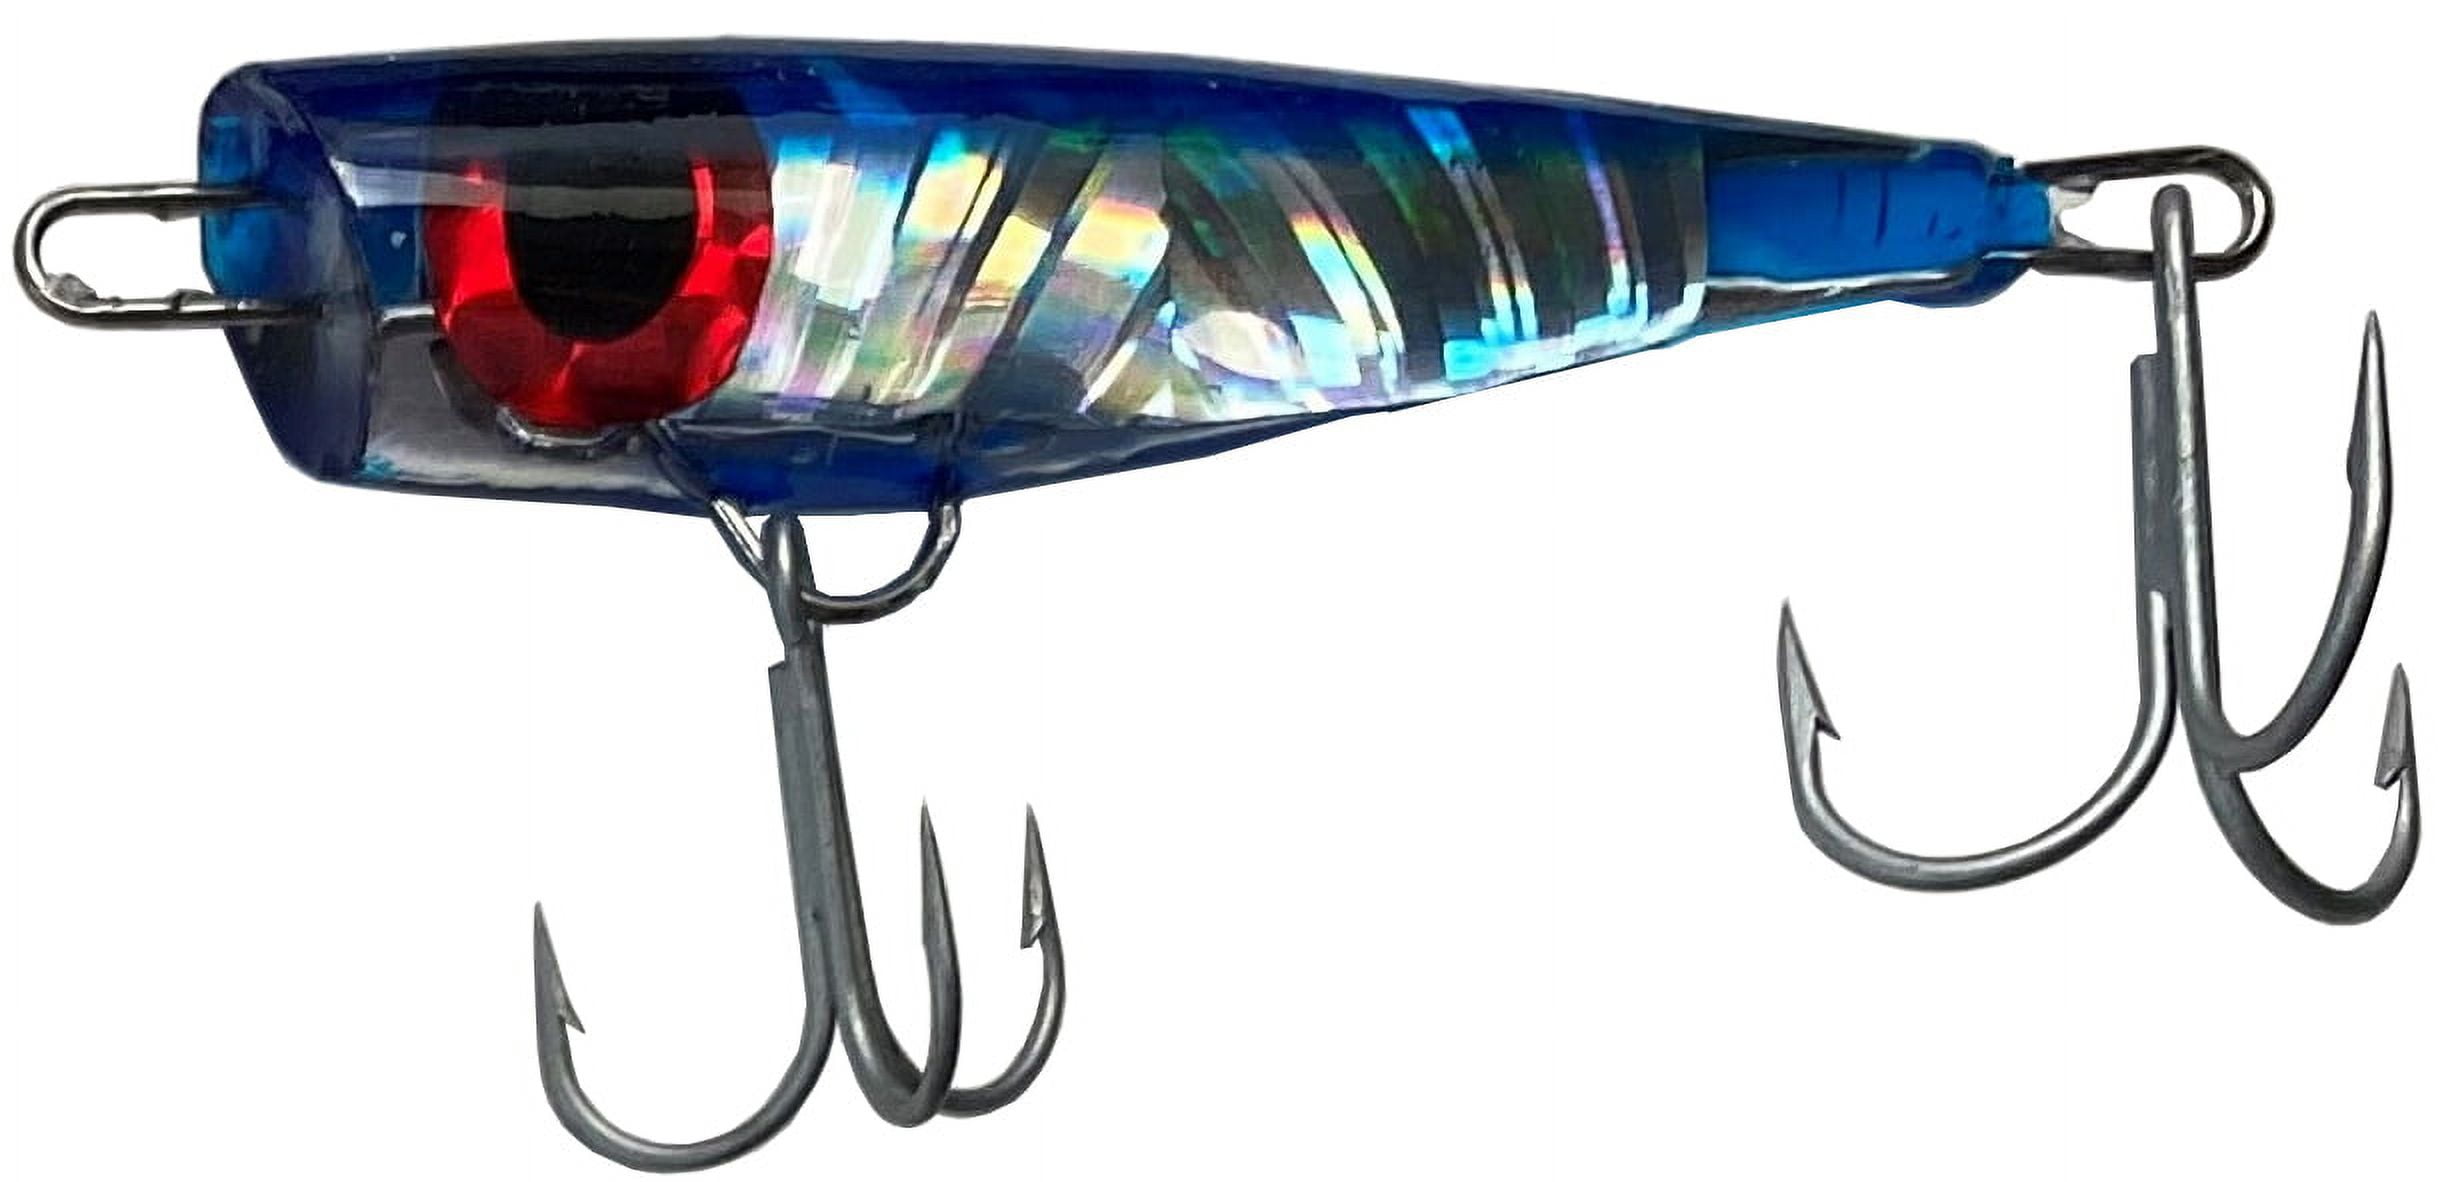 Marlin Lure Replacement Skirts